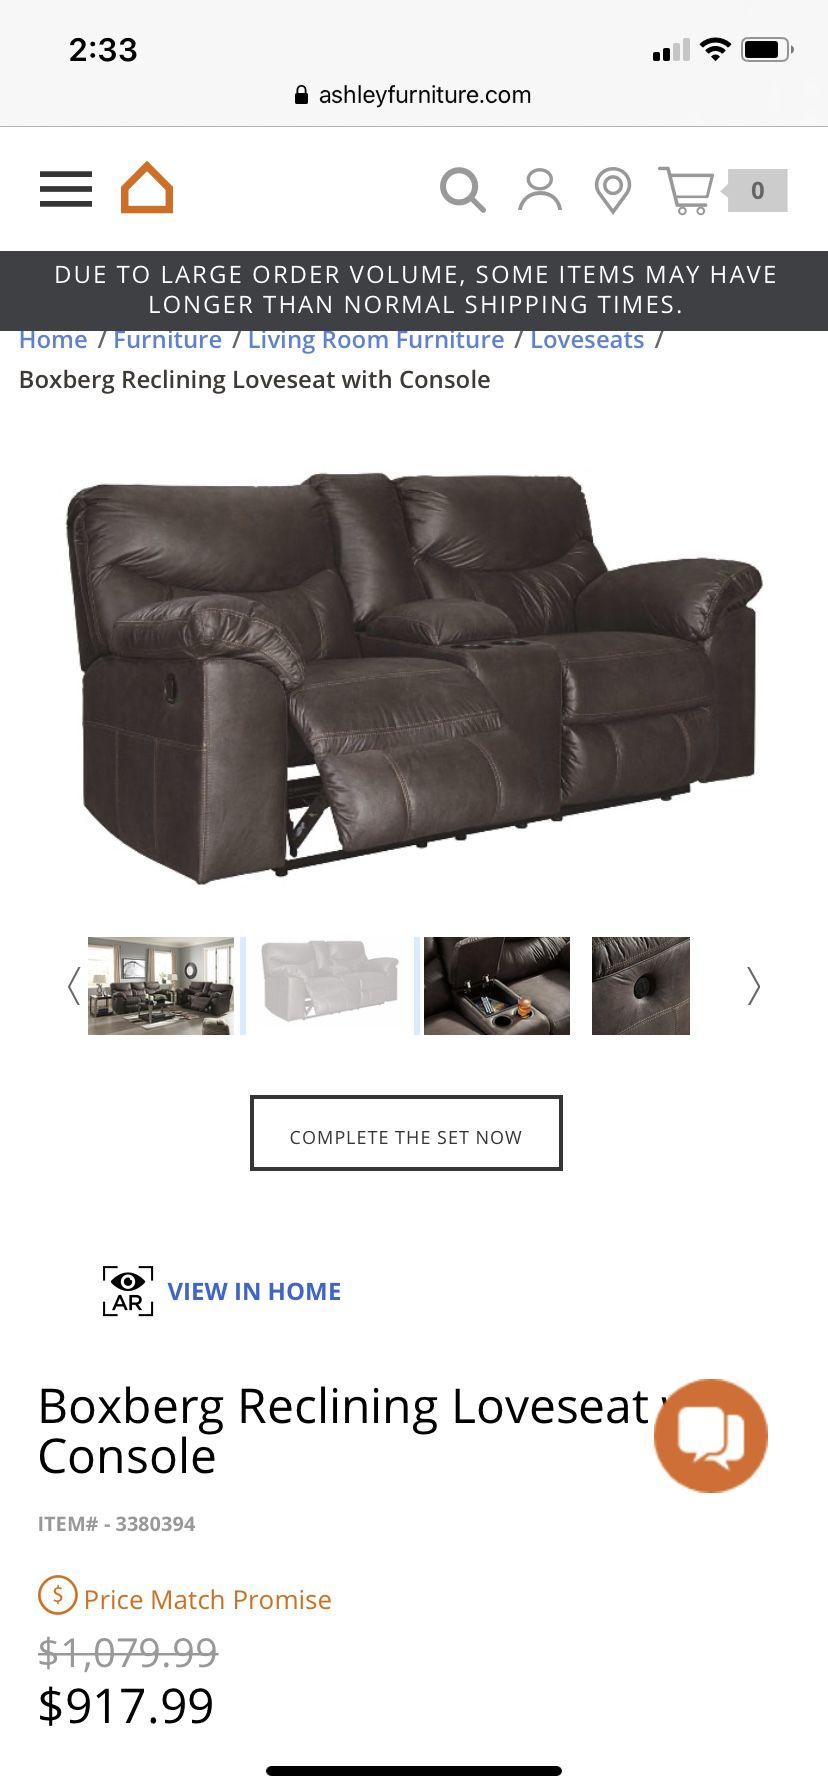 Ashley Furniture Boxberg Reclining Loveseat with Console